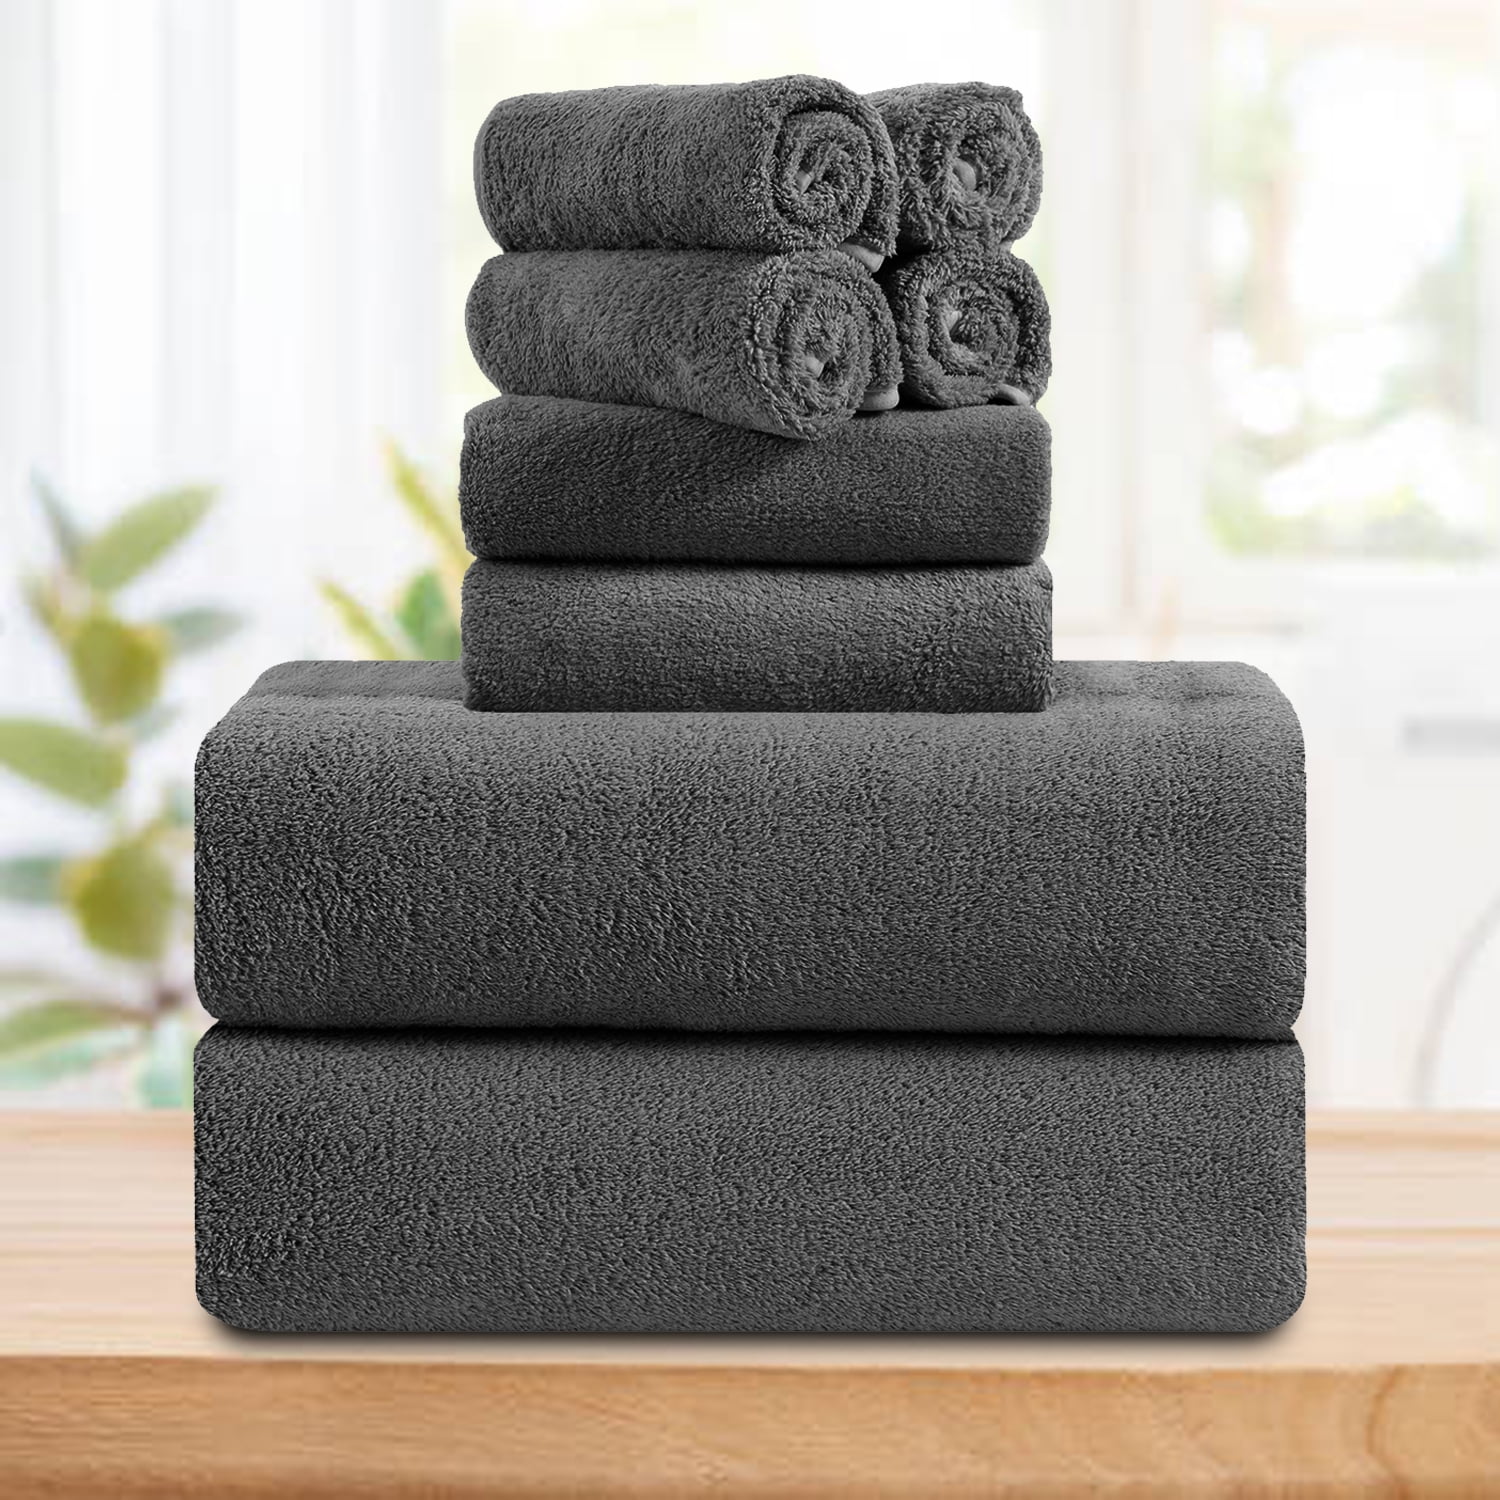 Smuge 4 Pack Oversized Bath Towel Set (35 x 70 in,Cream) Ultra Soft Plush Bathroom  Towels 700 GSM Highly Absorbent Quick Dry Bath Sheets Towels for Spa Hotel  Gym 